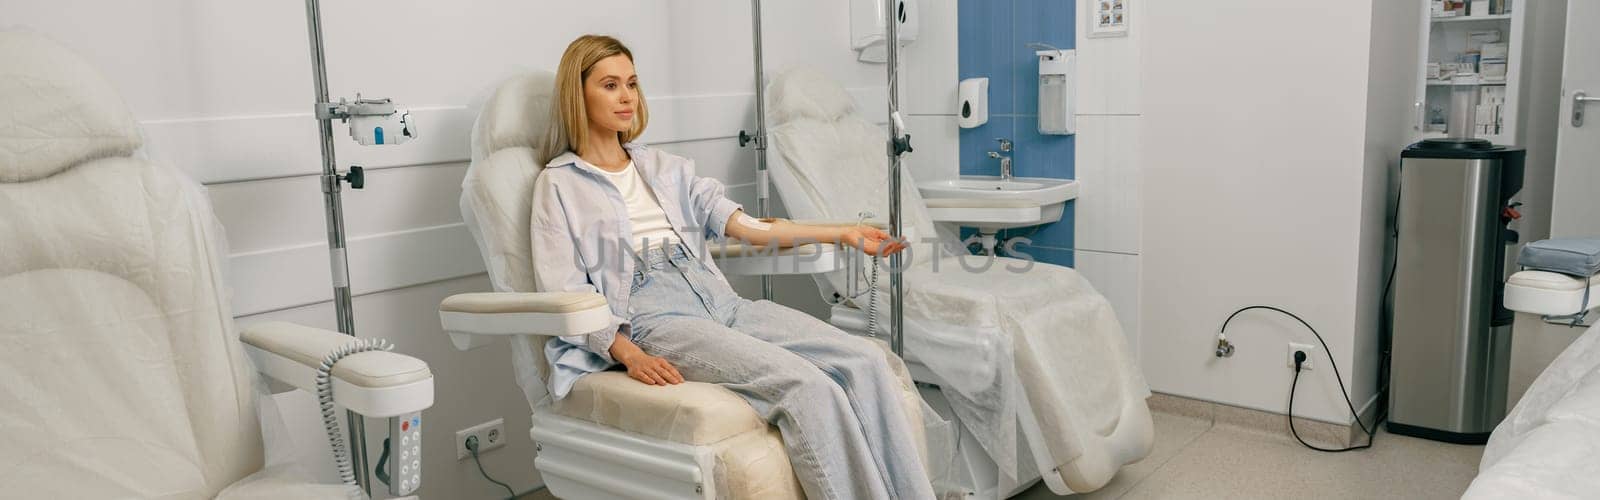 Pretty woman patient sitting in armchair while receiving IV infusion during treatment in hospital by Yaroslav_astakhov